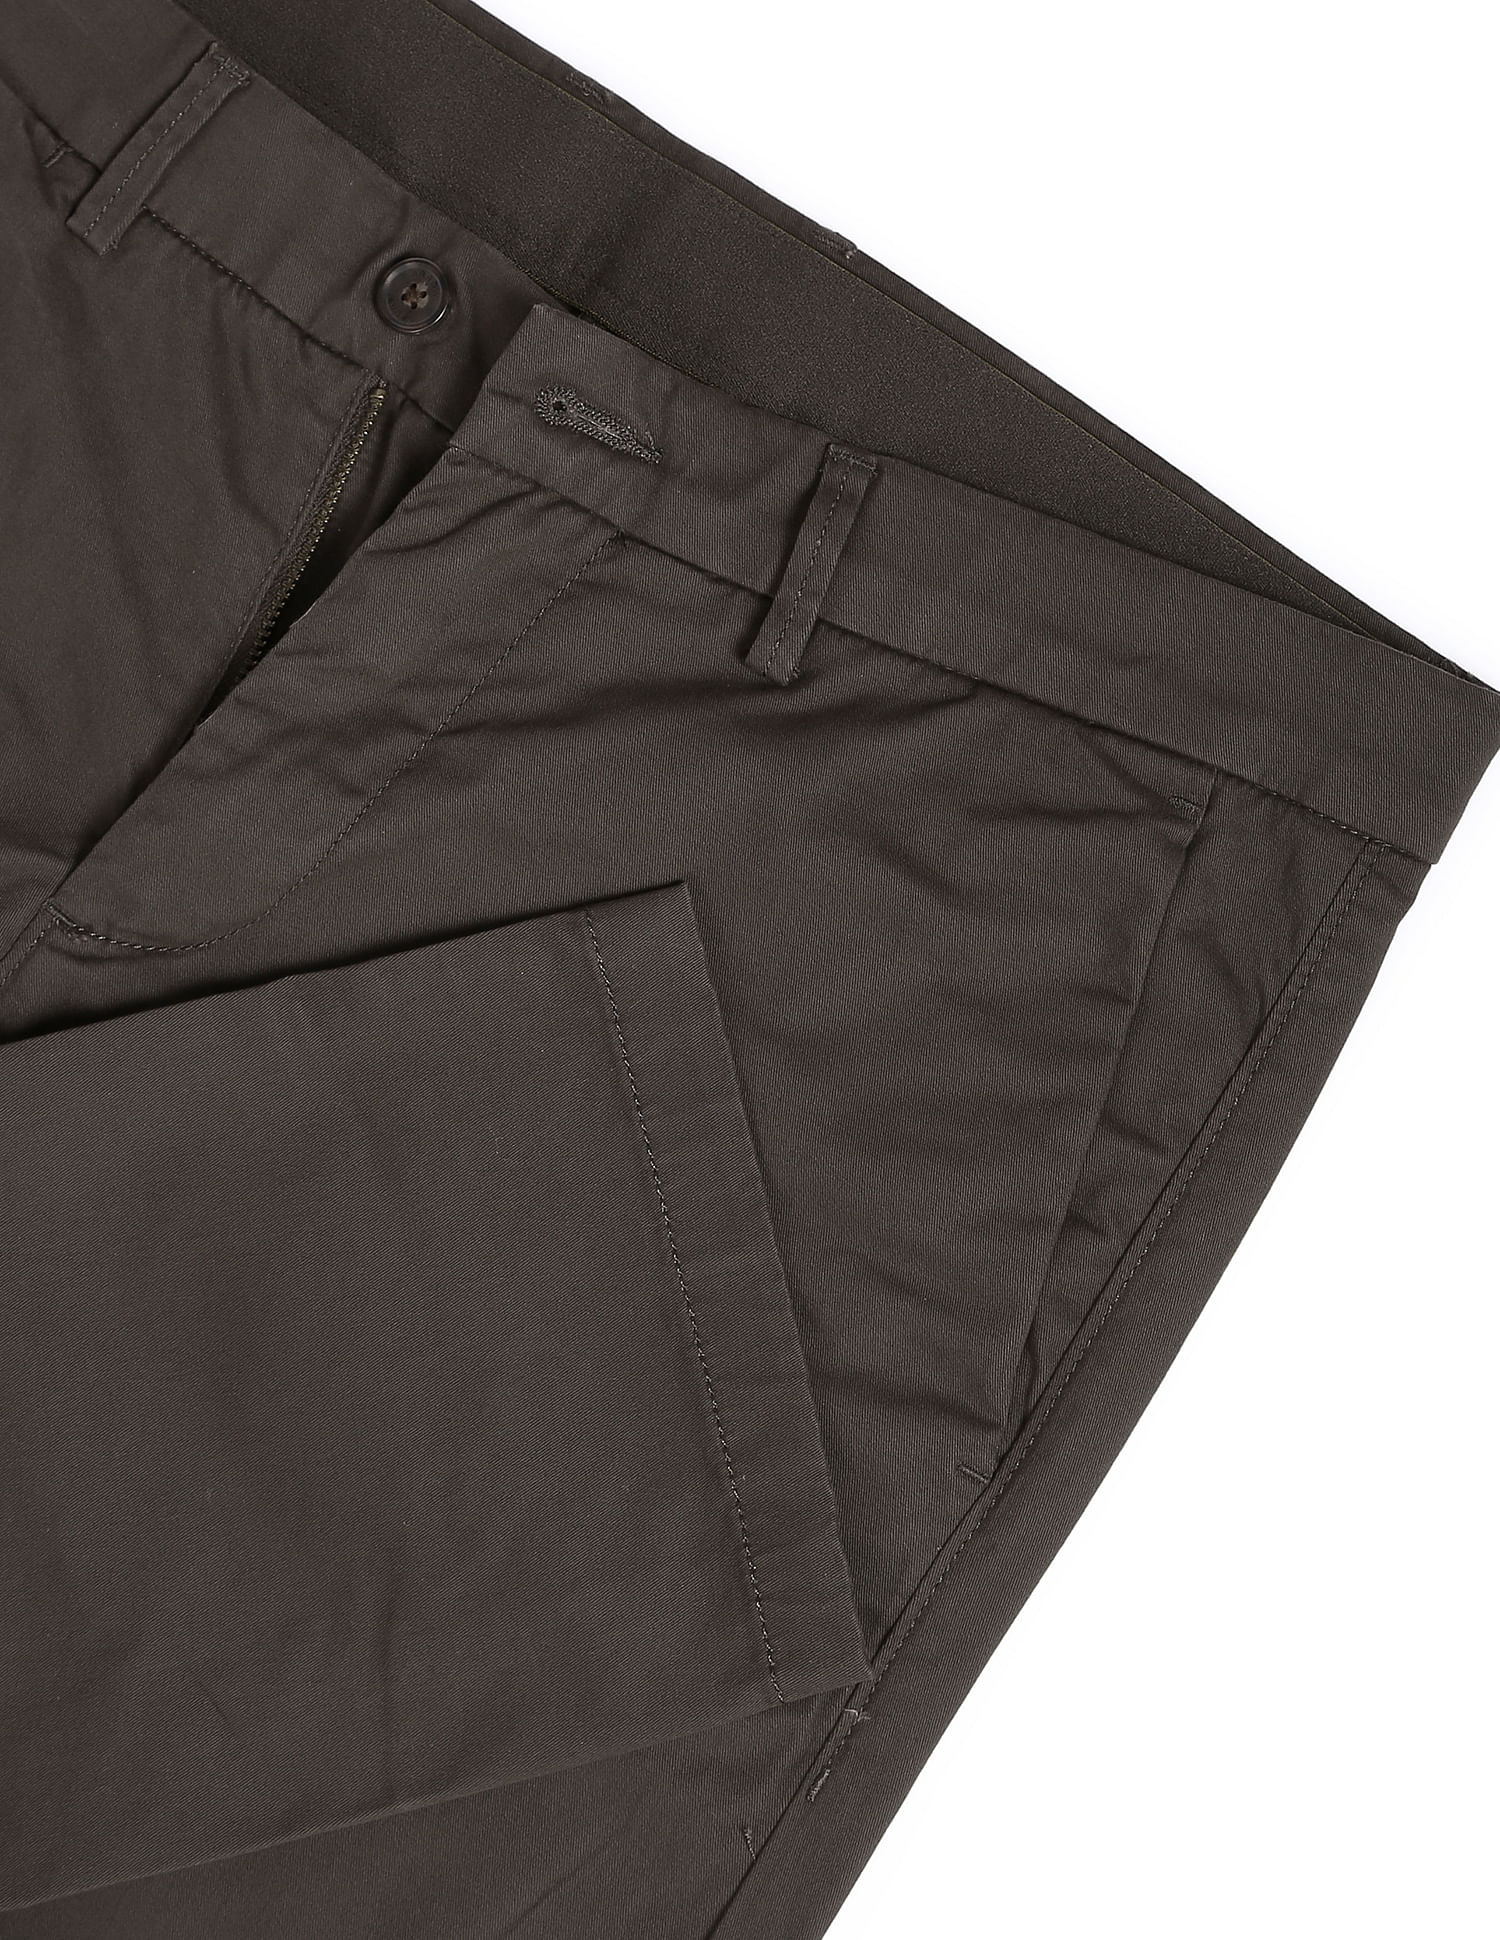 Quick Dry Grey Shade Medium Size Washable And Stylish Casual Trouser For Men  at Best Price in Indore  U  Man Garments